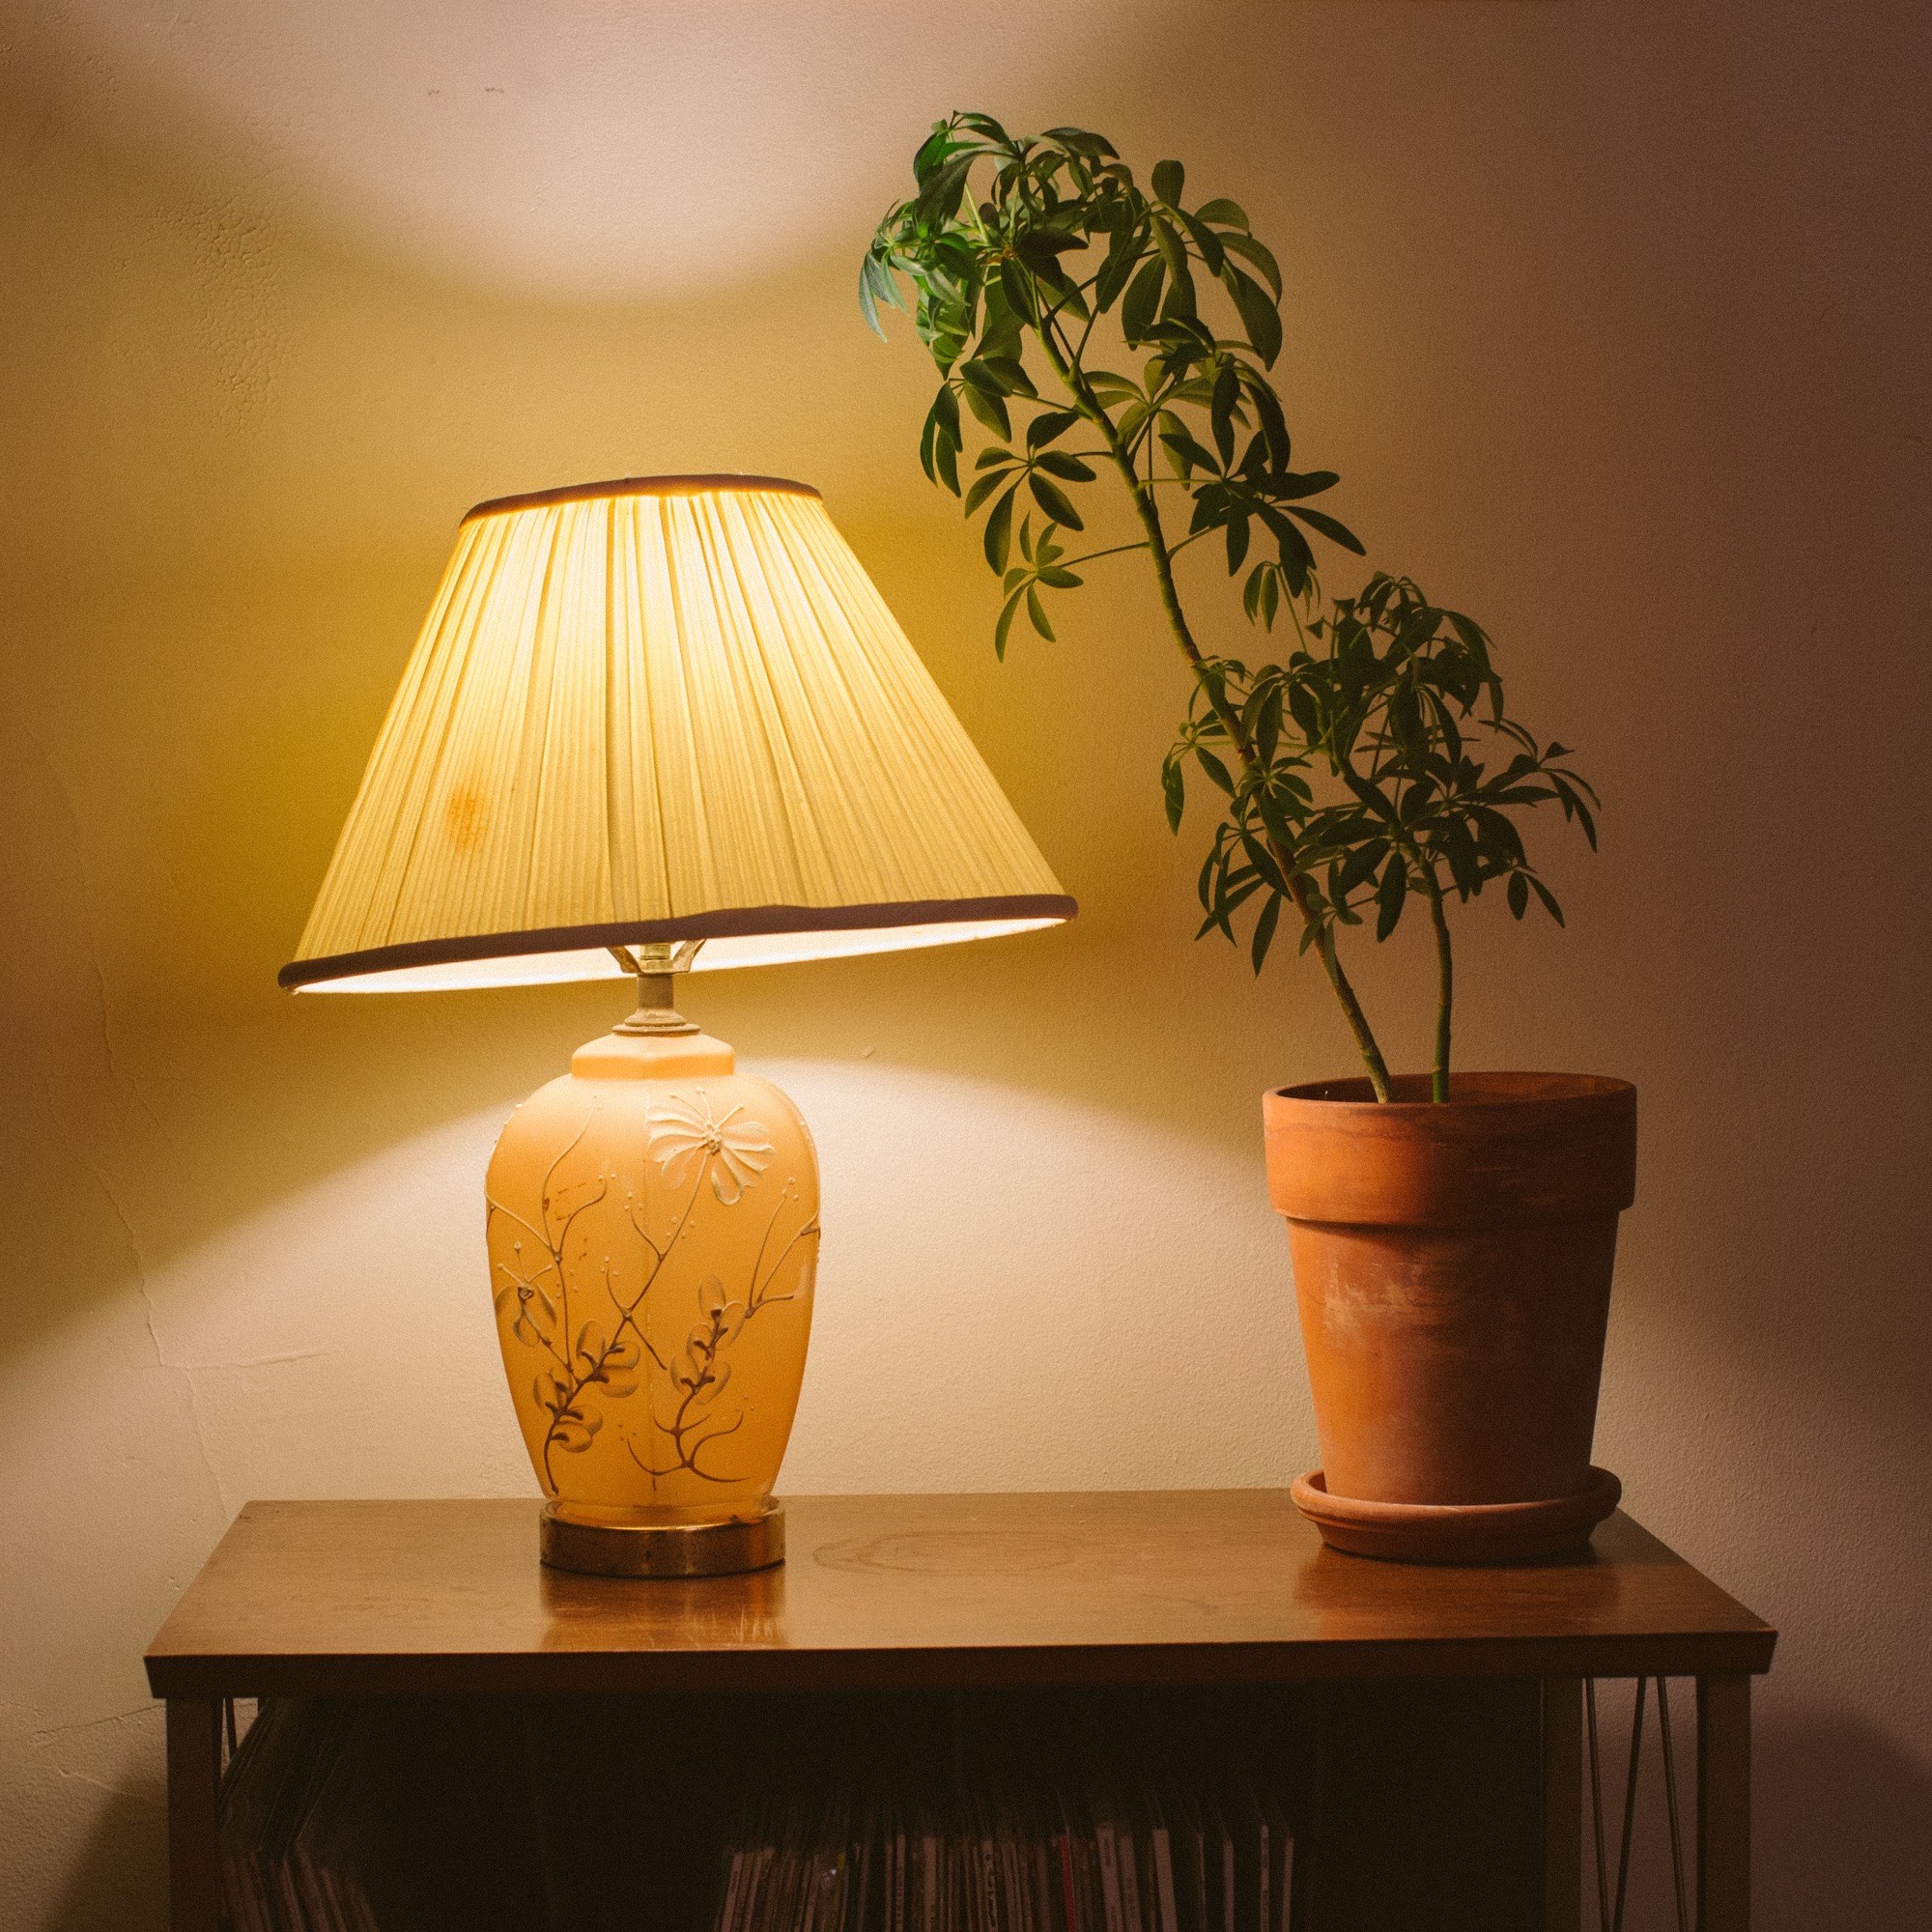 A glass table lamp with flowers on the base casts a warm, cozy glow of light across a wall.